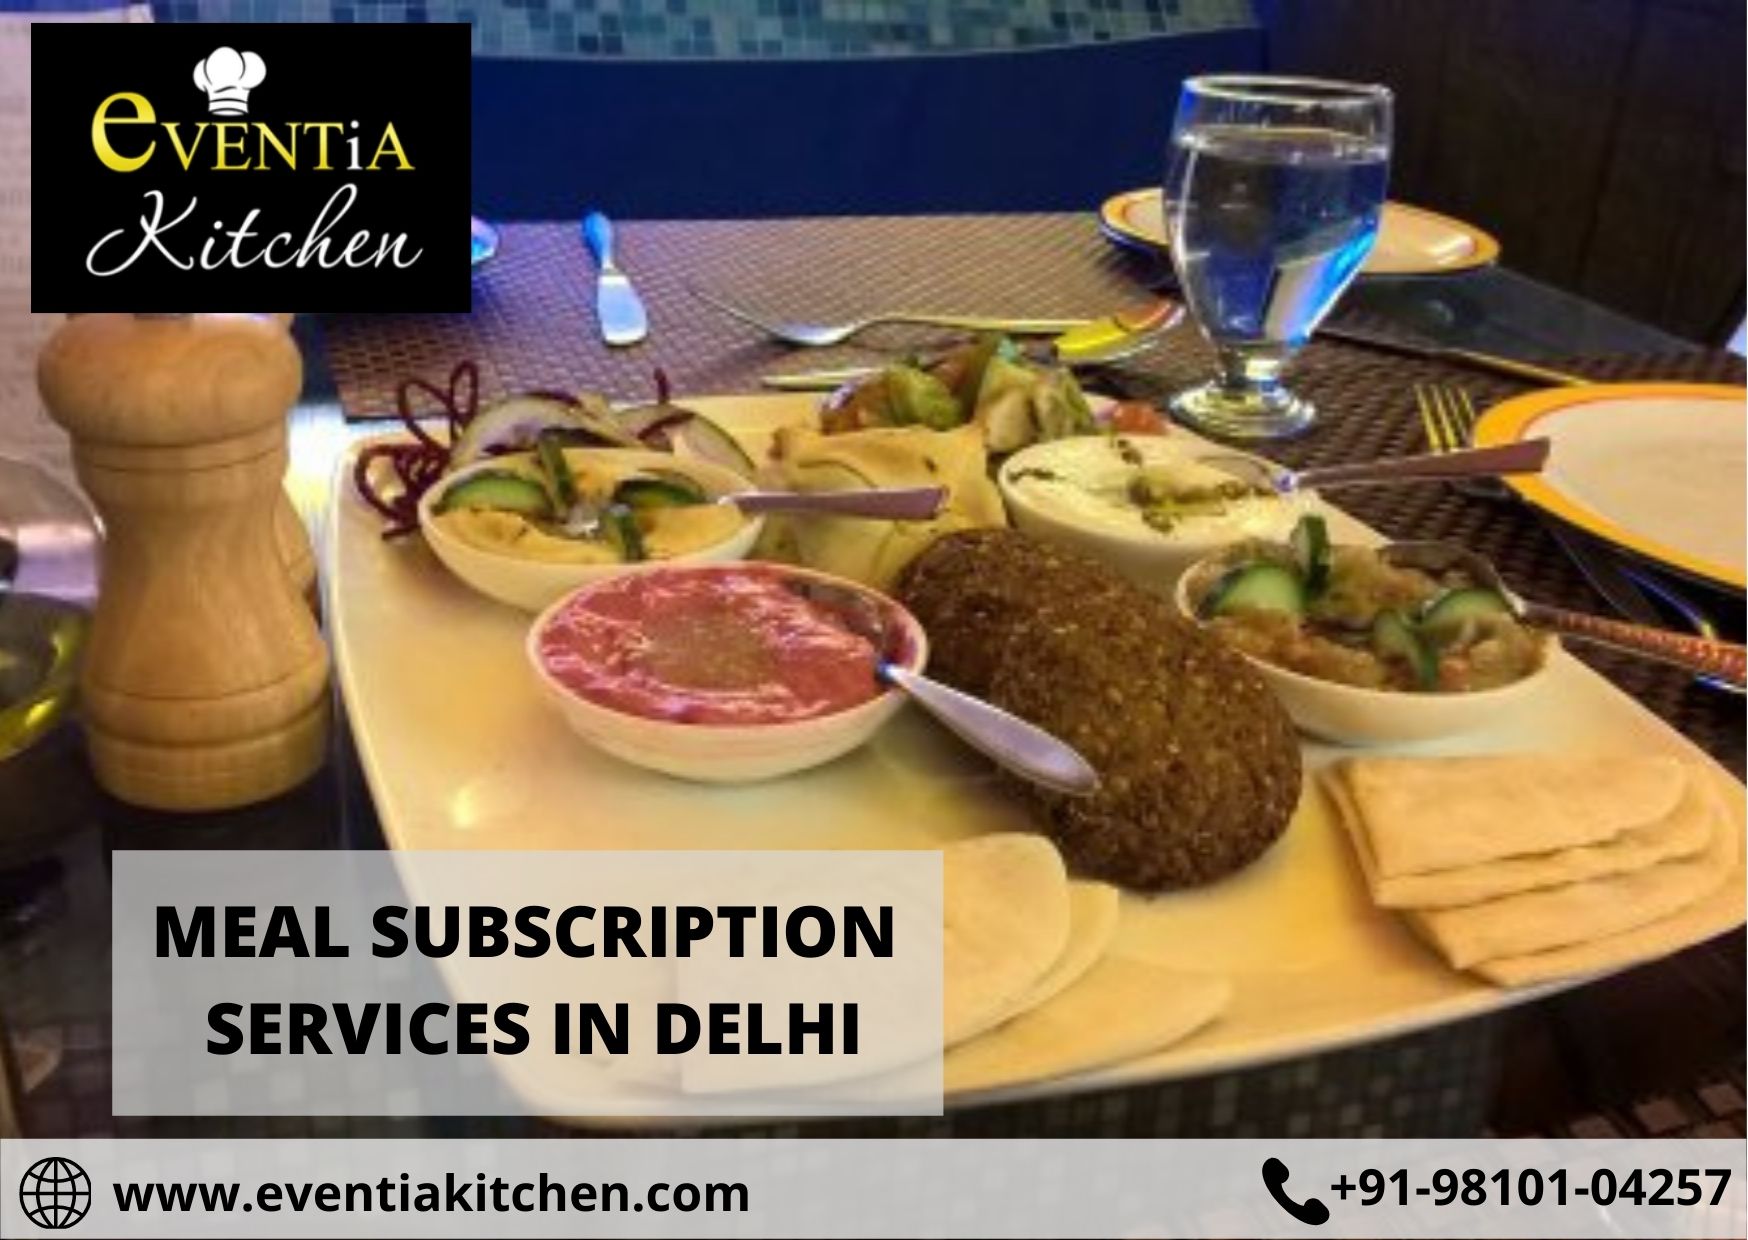 MEAL SUBSCRIPTION SERVICES IN DELHI